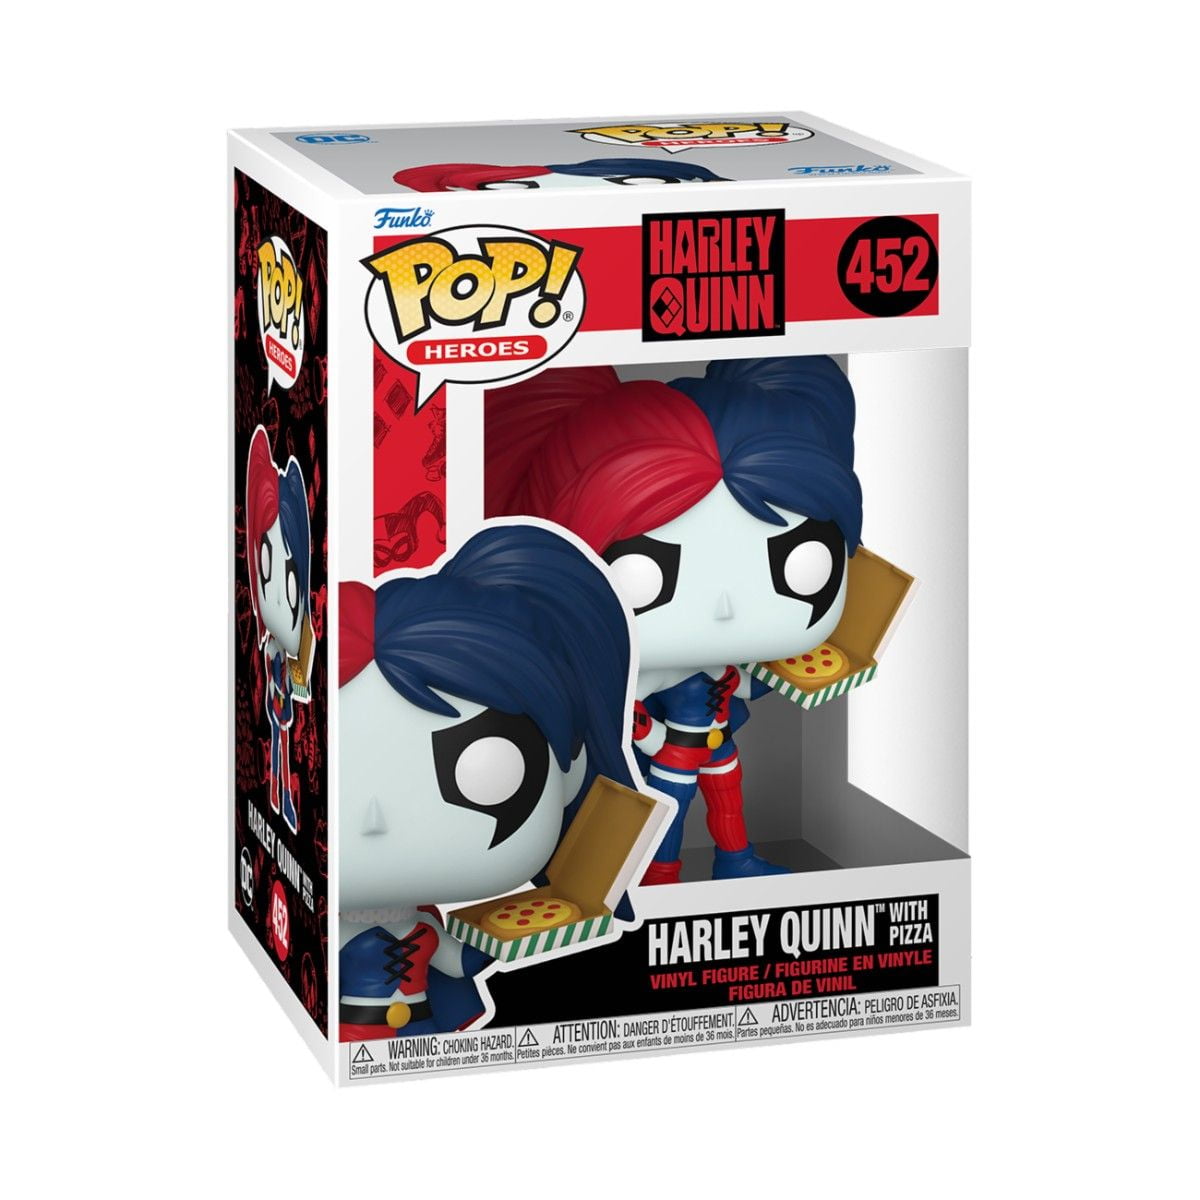 Harley with Pizza - DC - Funko POP! Heroes (452)